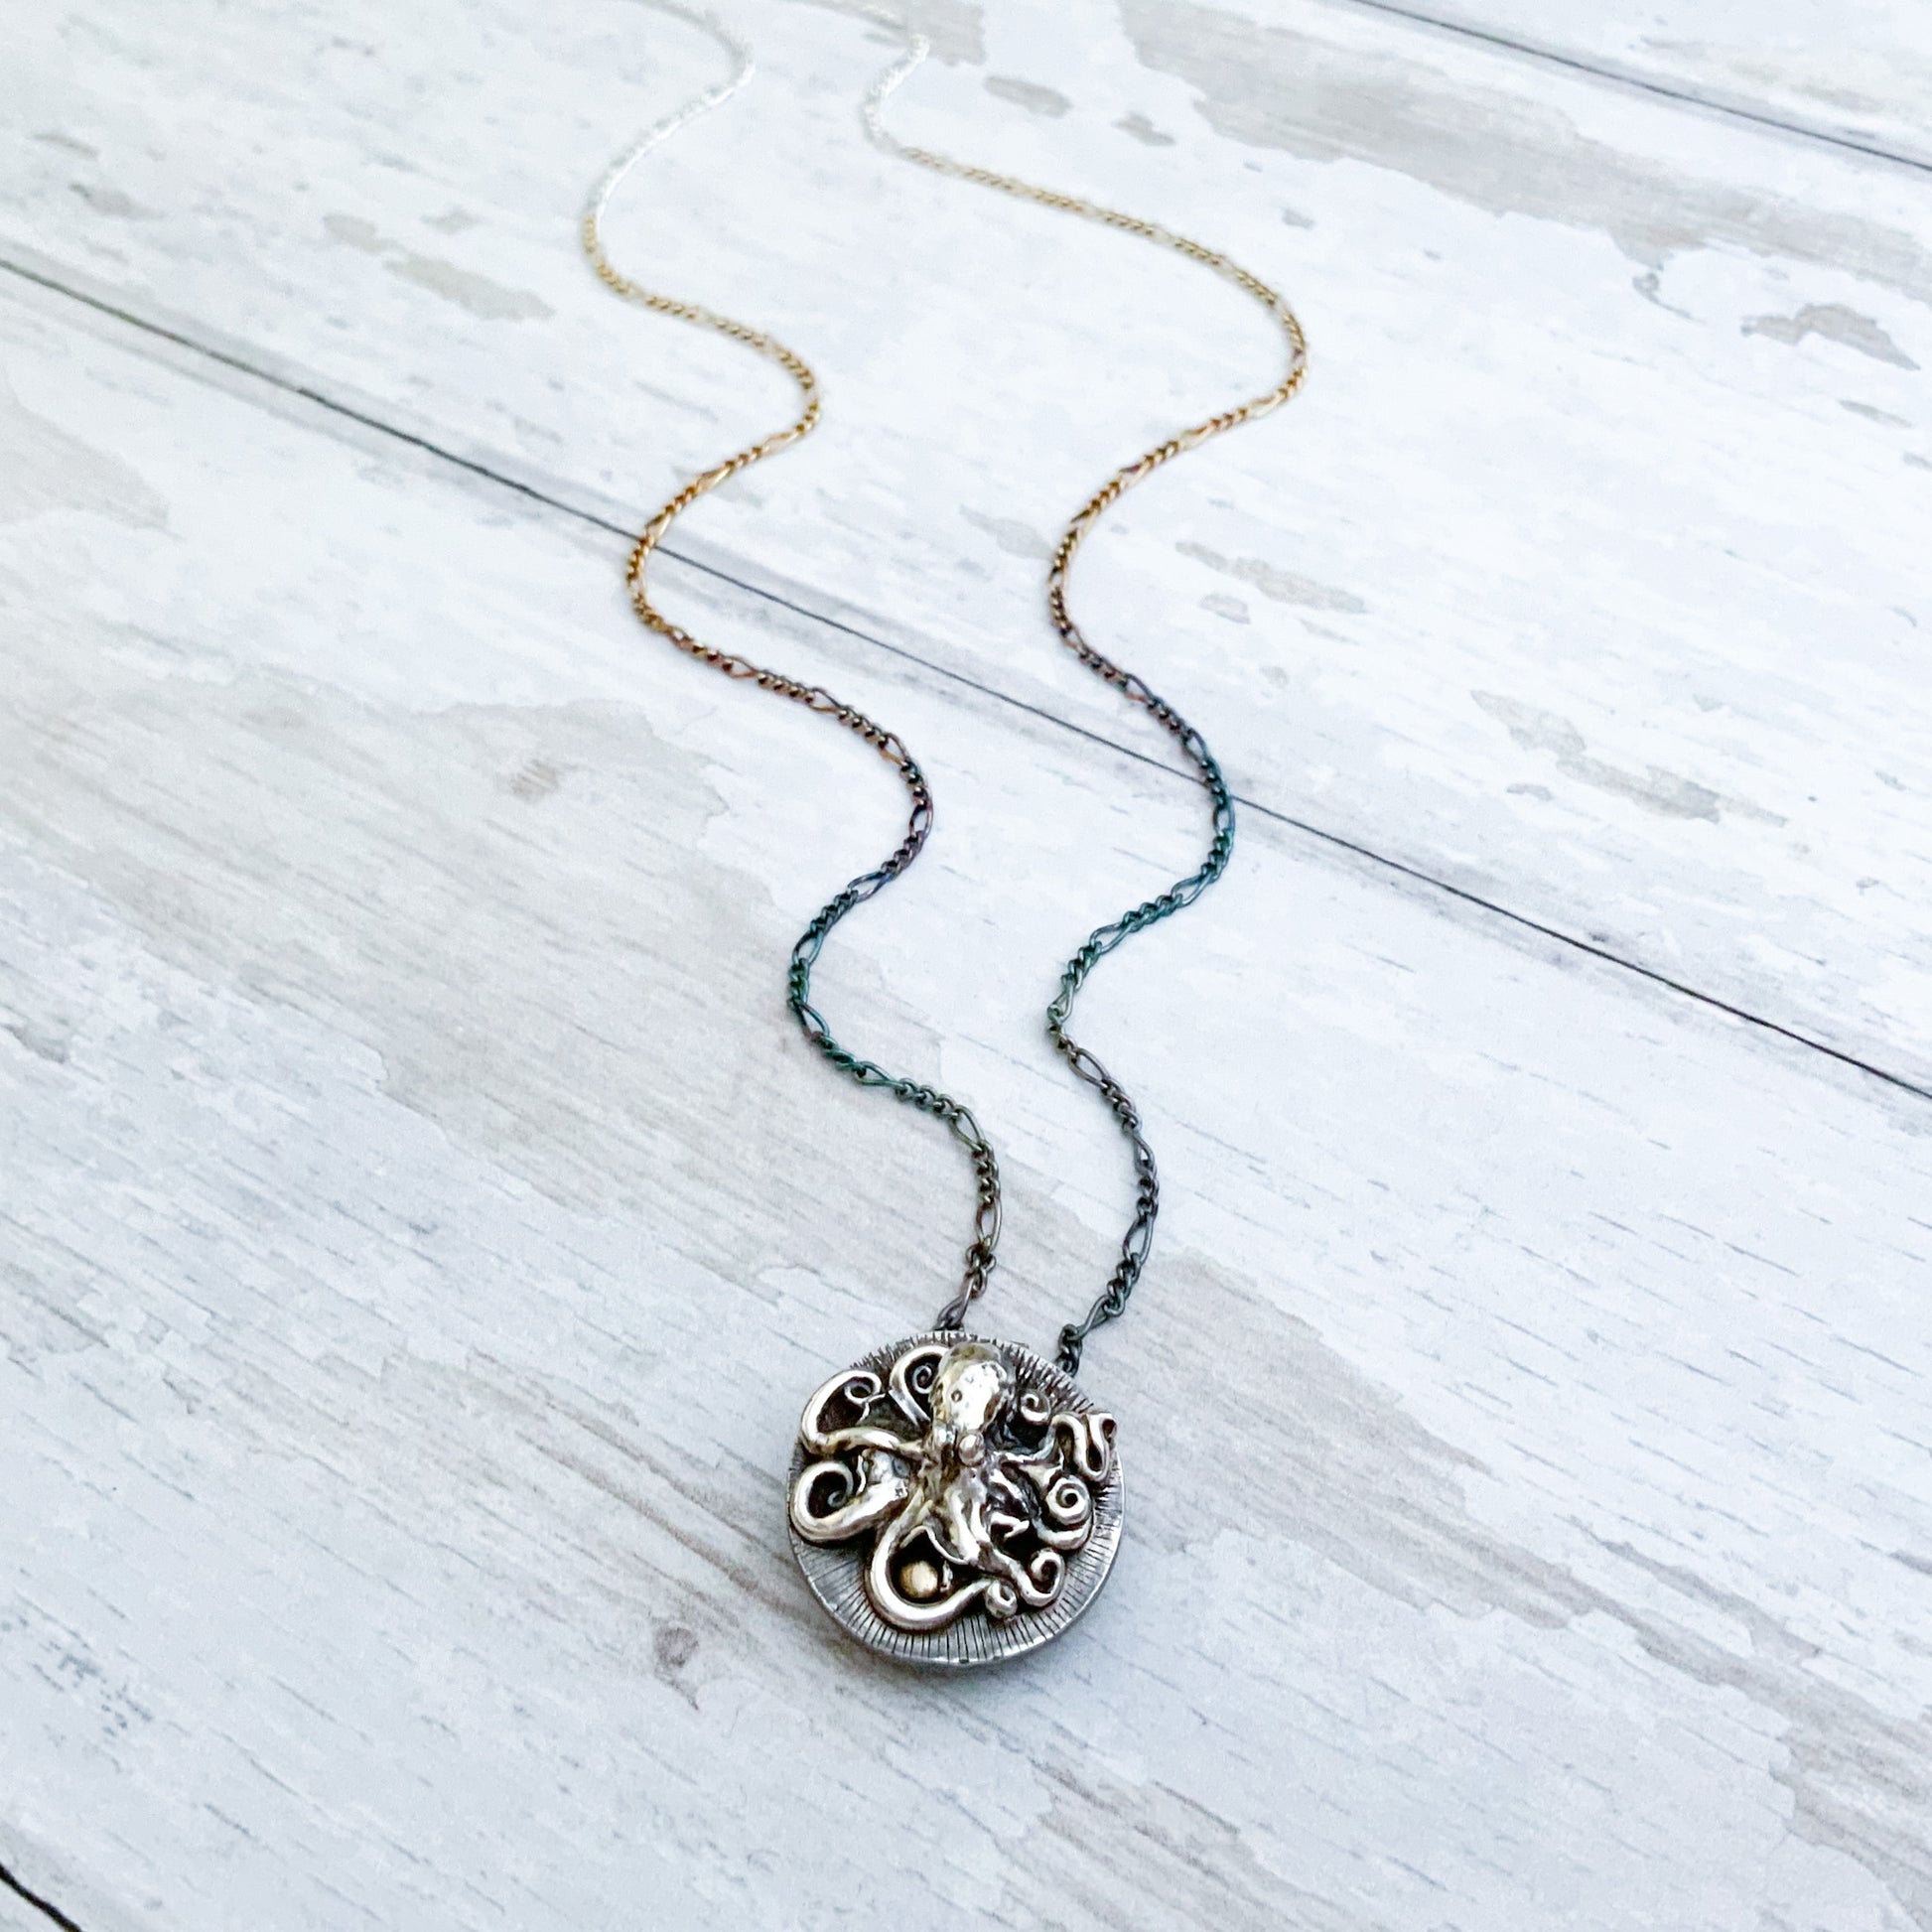 Accurate 3D octopus necklace in silver and gold